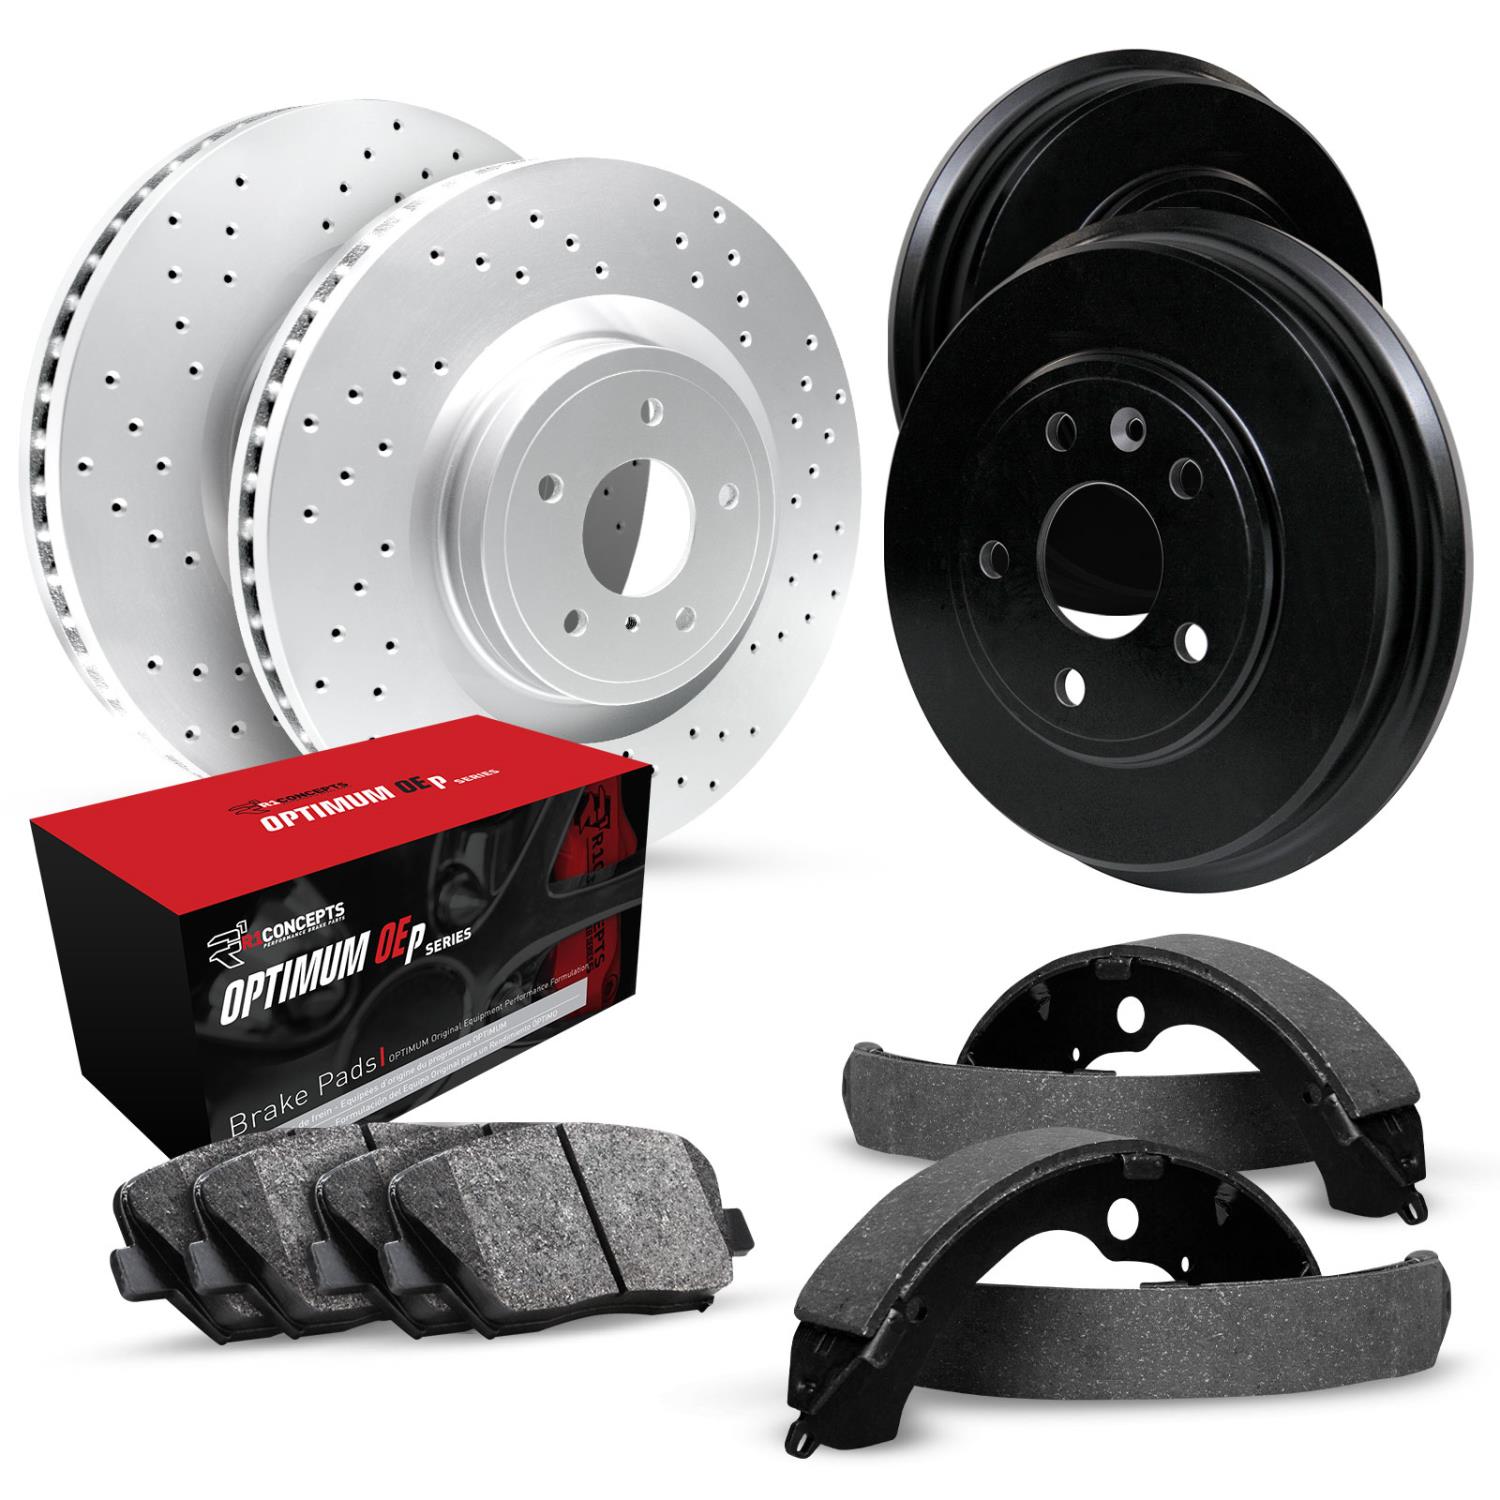 GEO-Carbon Drilled Brake Rotor & Drum Set w/Optimum OE Pads & Shoes, 2002-2007 Mitsubishi, Position: Front & Rear